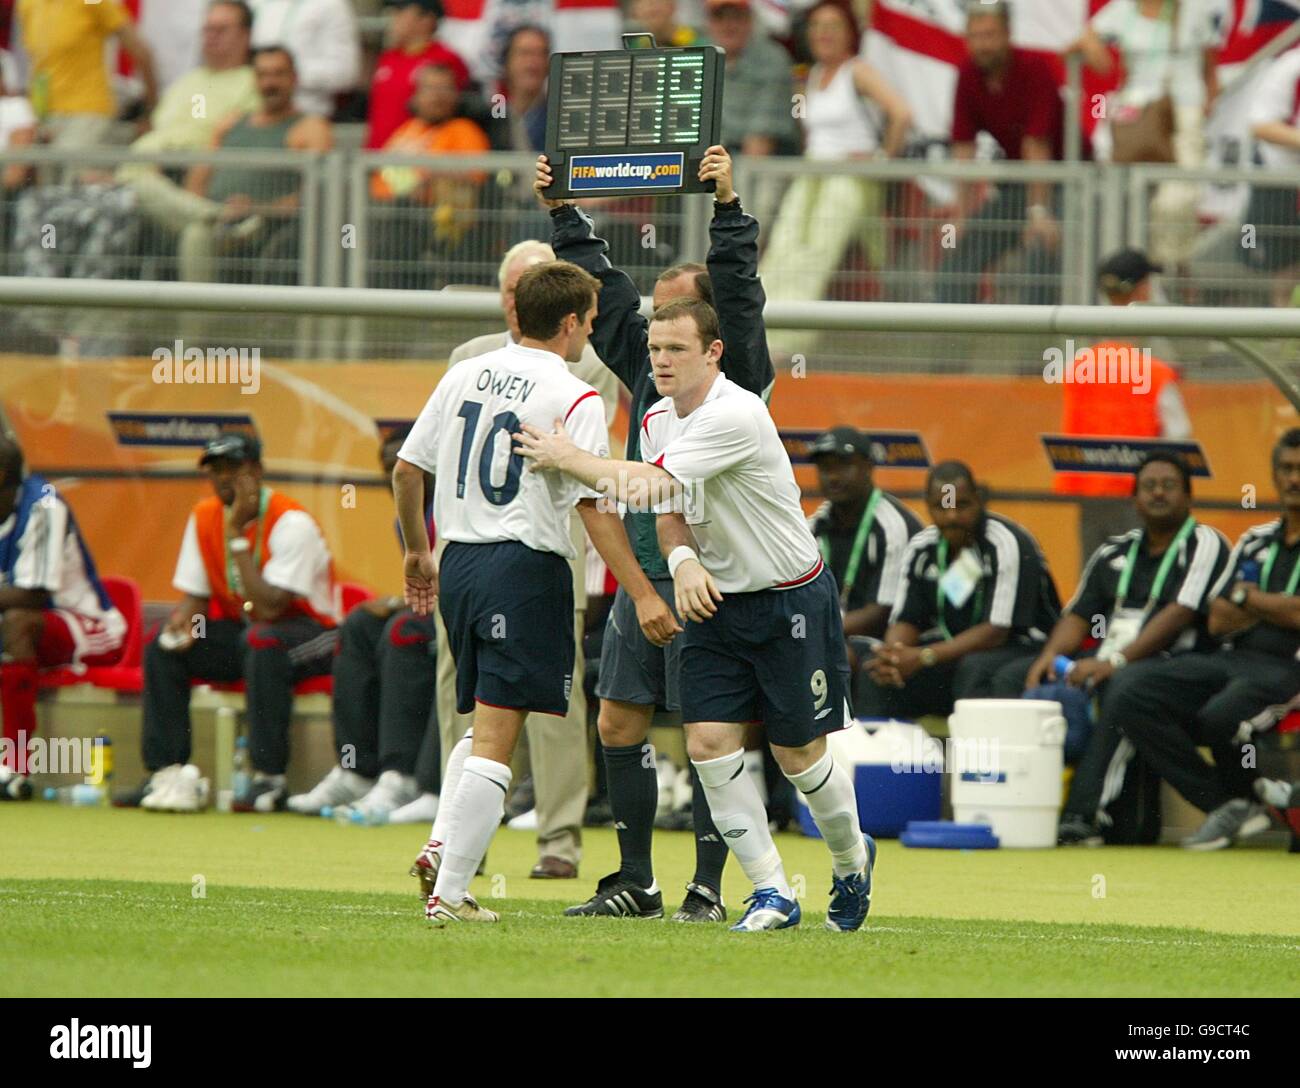 Soccer - 2006 FIFA World Cup Germany - Group B - England v Trinidad & Tobago - Franken-Stadion. England's Wayne Rooney comes on to replace Michael Owen Stock Photo